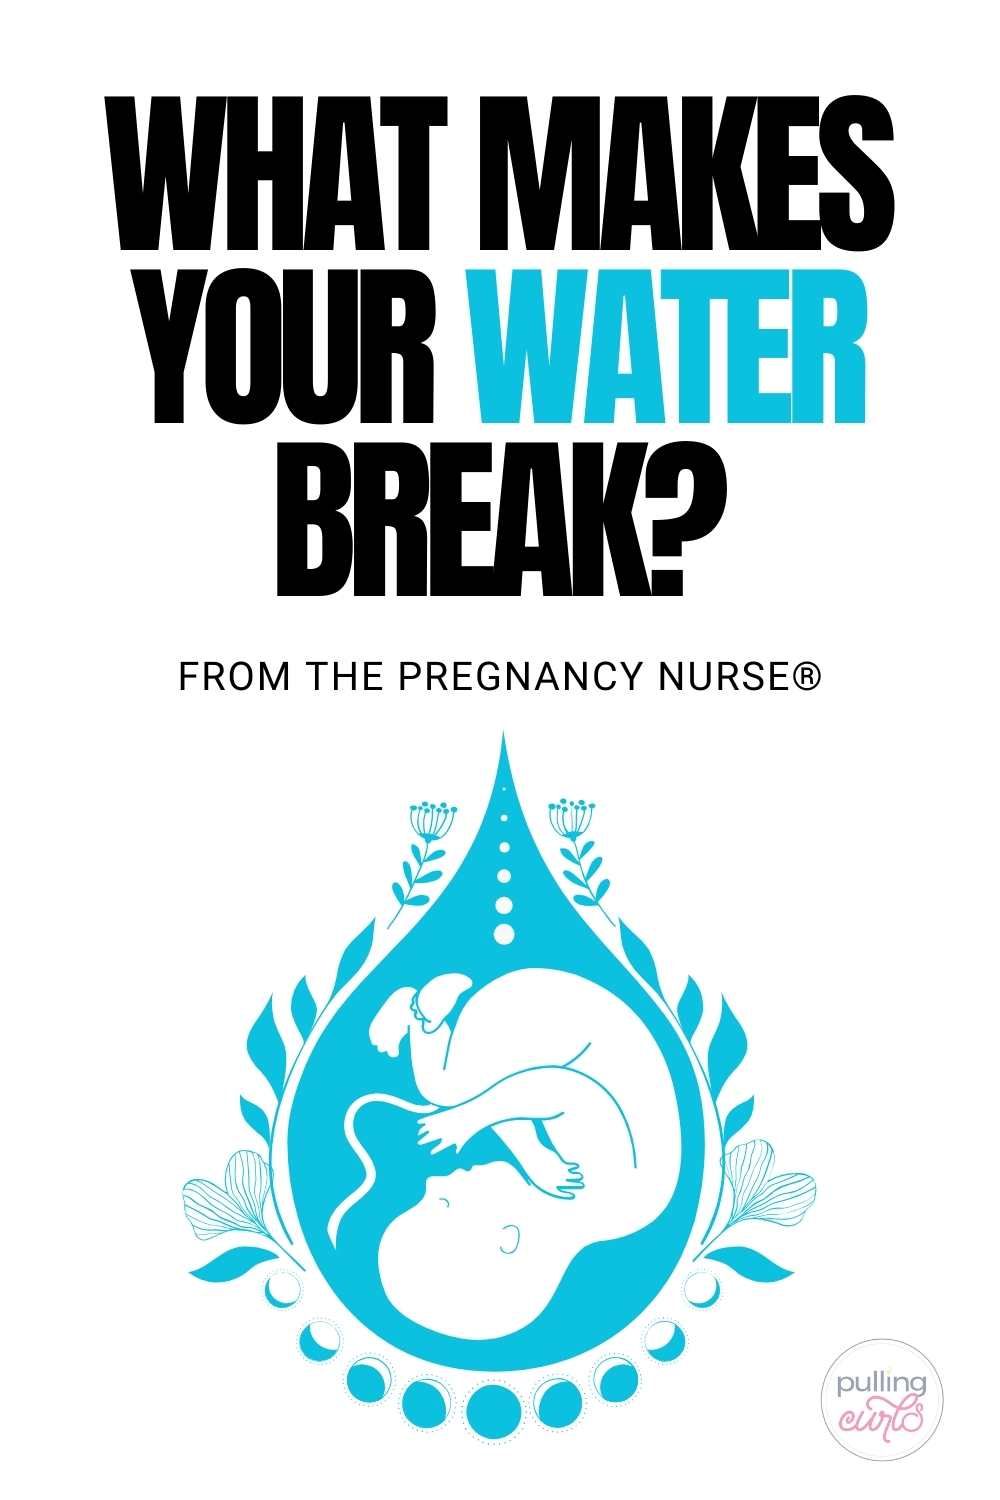 Unravel the mystery of the water break! Discover the science behind this fascinating and crucial moment in the childbirth process. Learn about the various factors that lead to your water breaking and the signs to watch for before the big moment arrives. A must-read for expecting mothers! via @pullingcurls